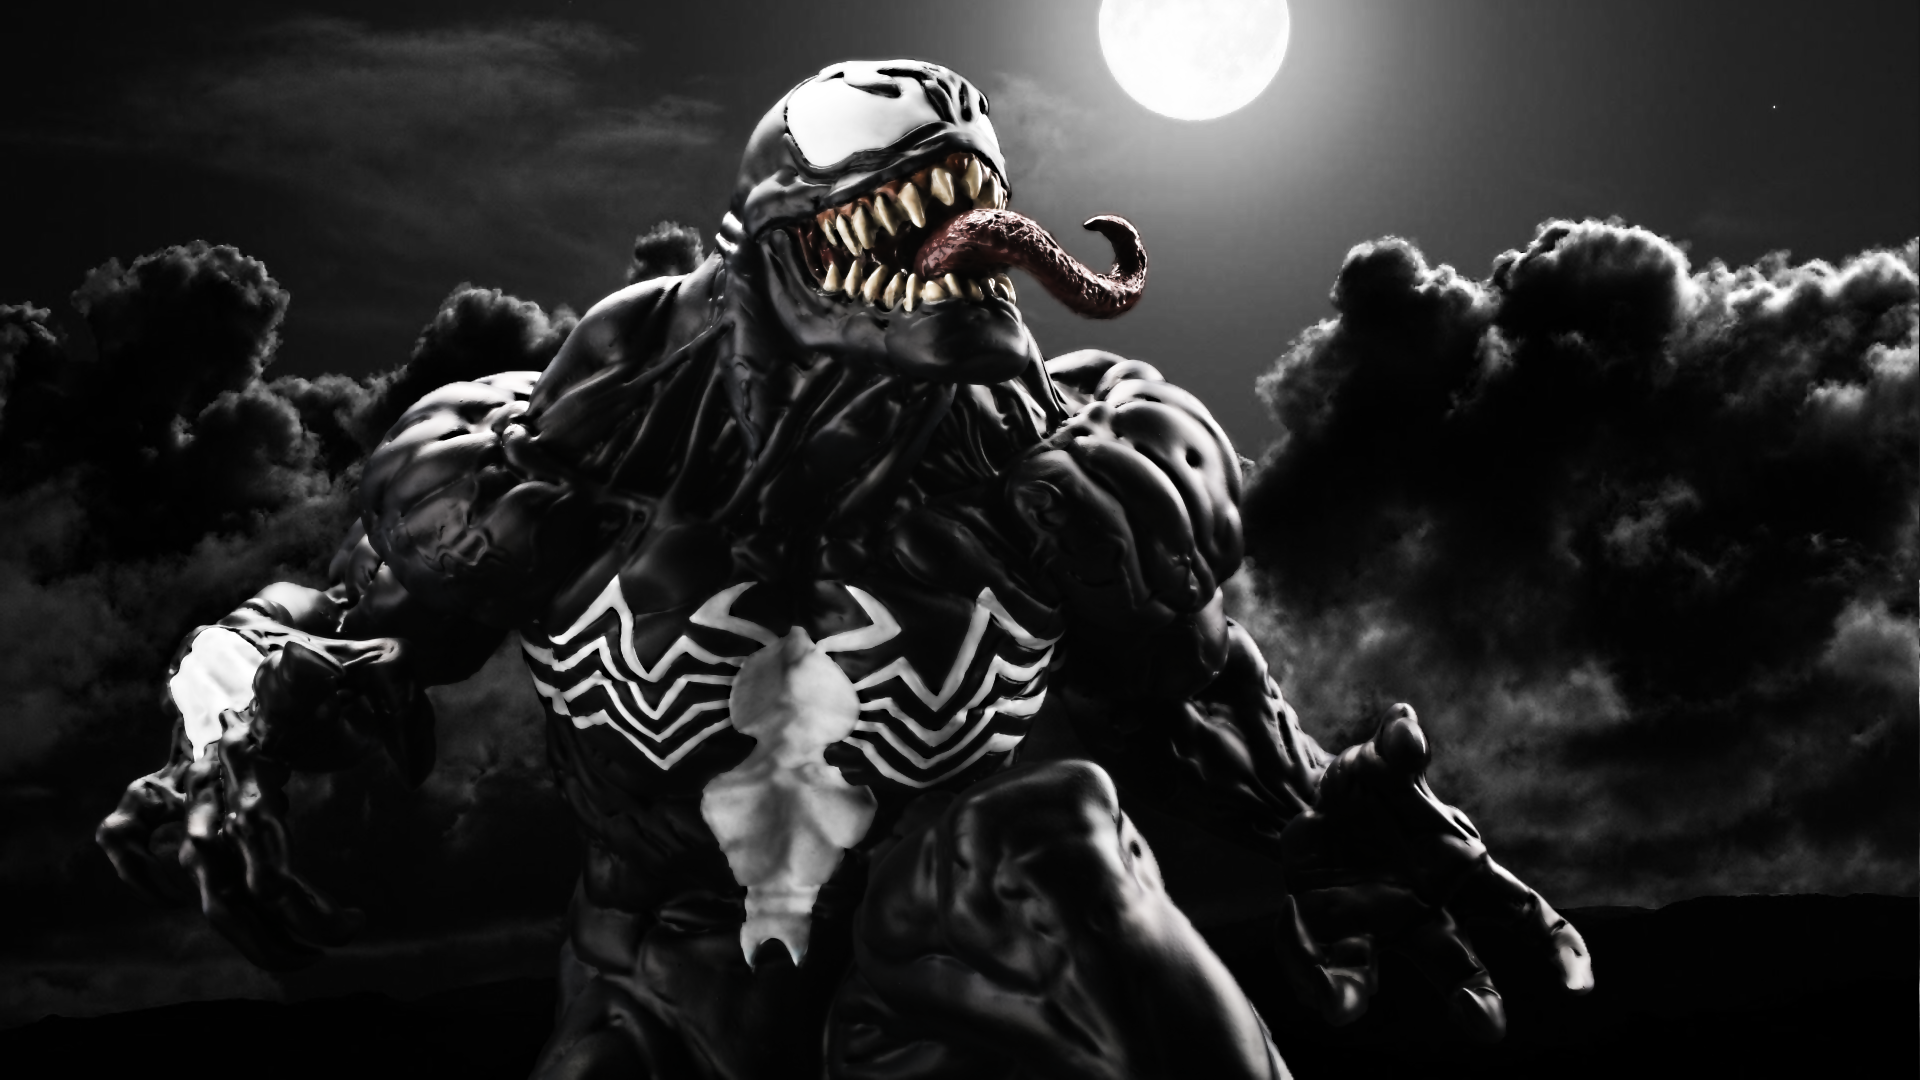 Venom Wallpapers Images Photos Pictures Backgrounds.